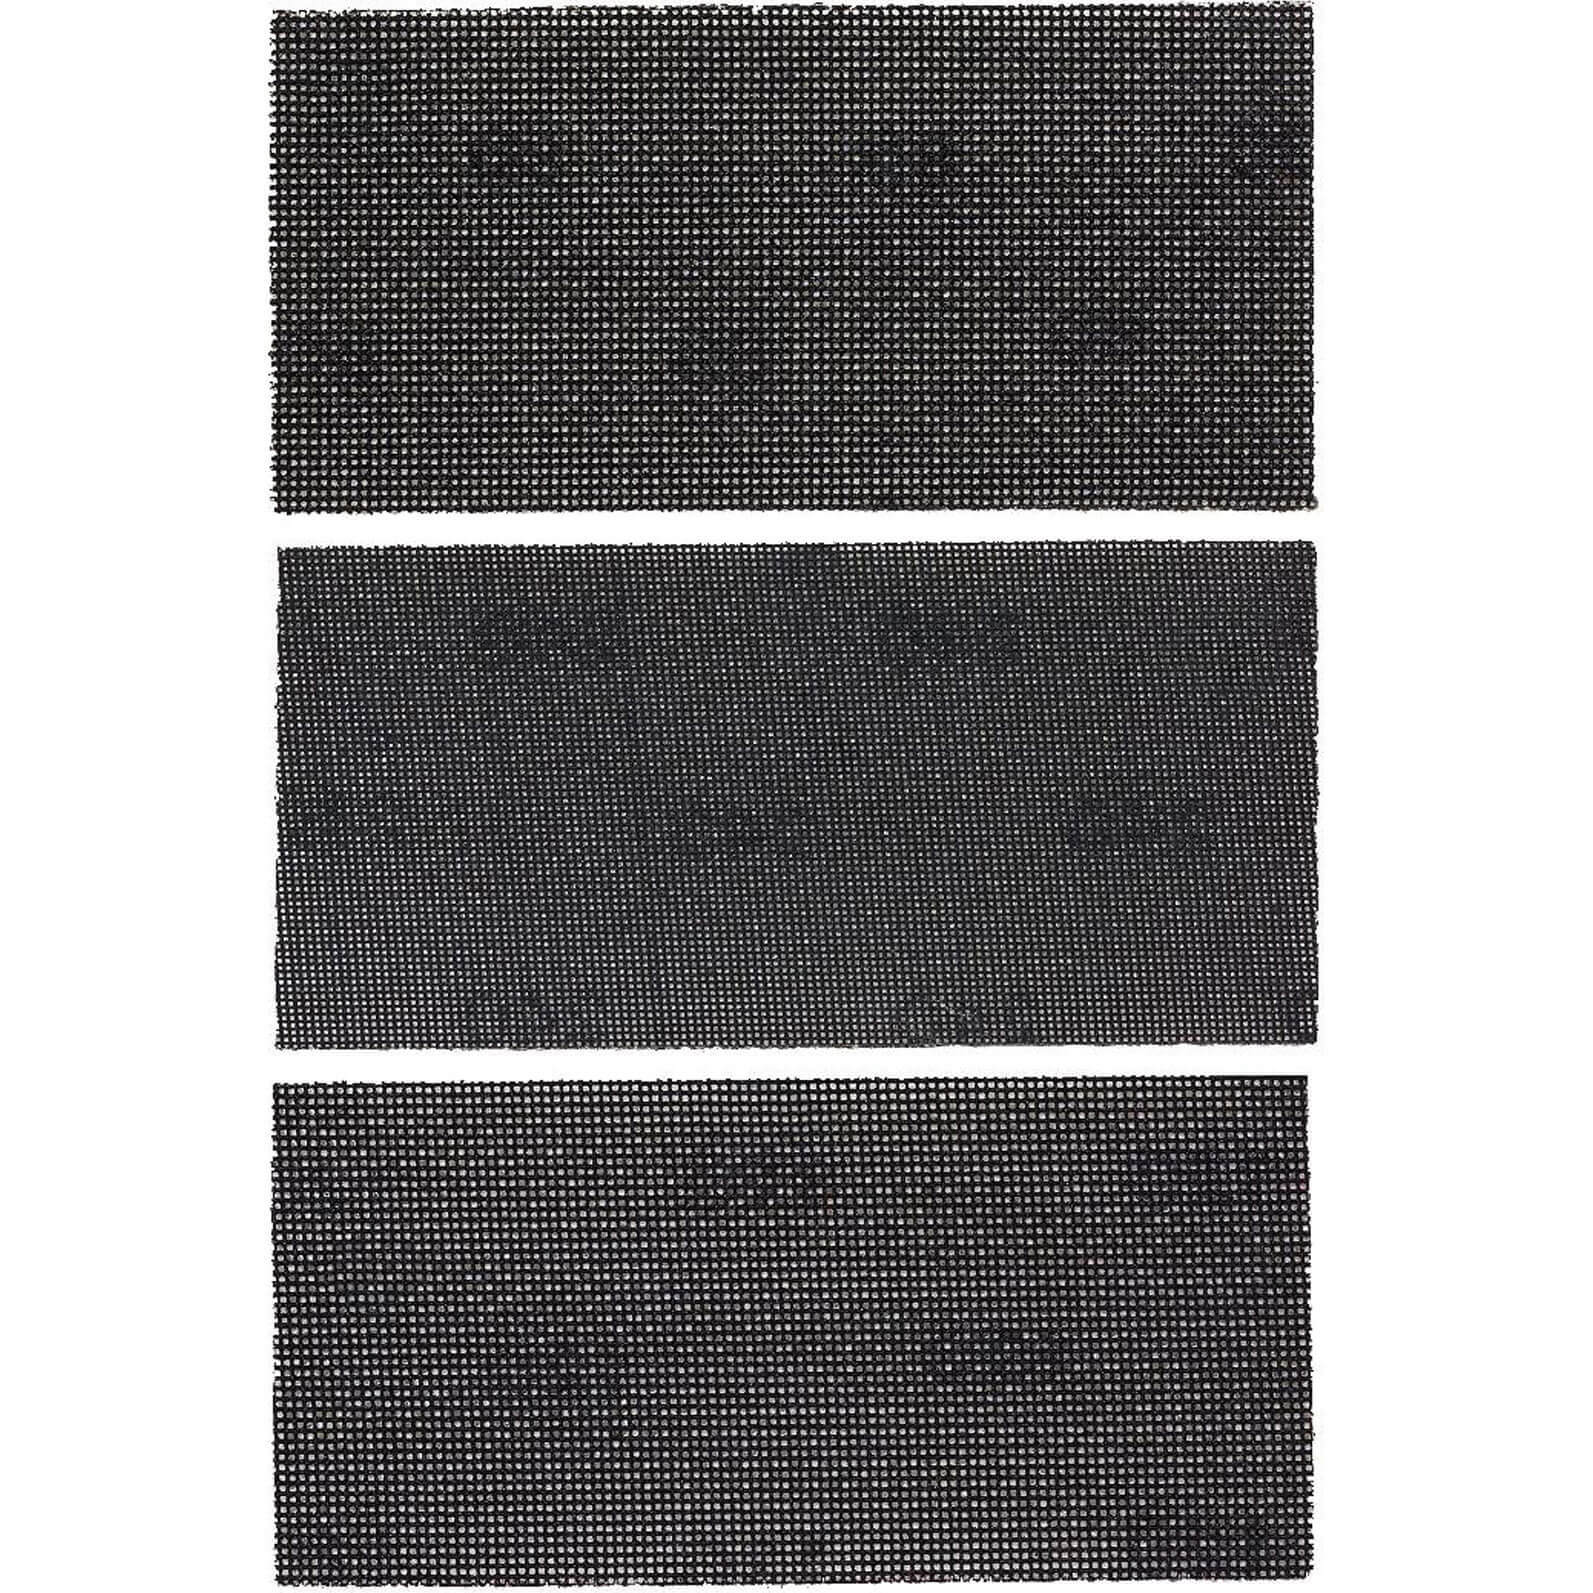 Image of Black and Decker Piranha Hi Tech Quick Fit Mesh 1/3 Sanding Sheets 93mm x 190mm Assorted Pack of 3